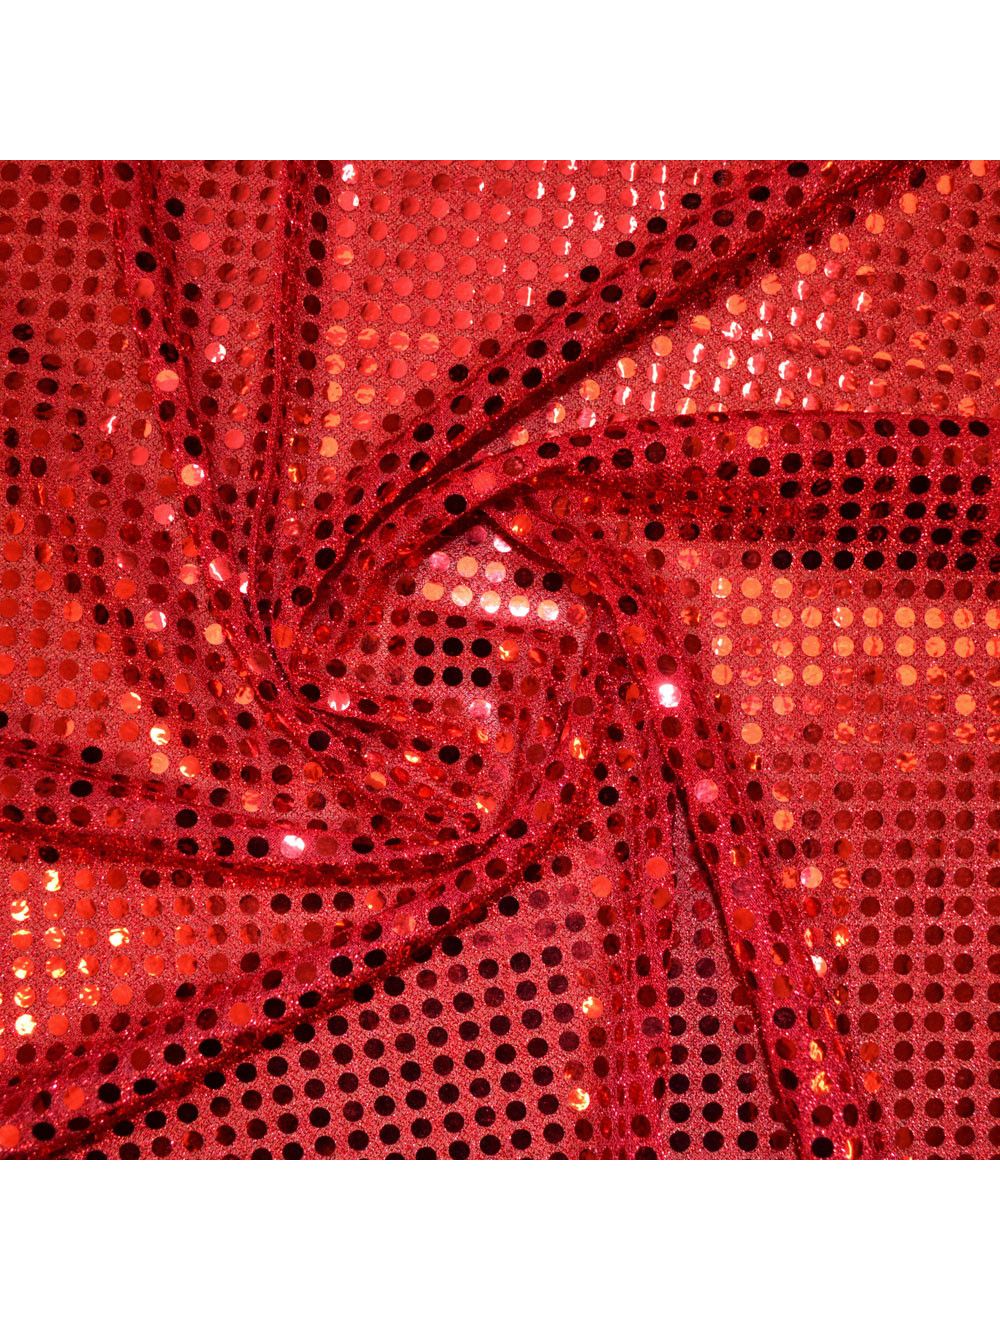 Red Sequin Jersey Fabric | Sequin ...